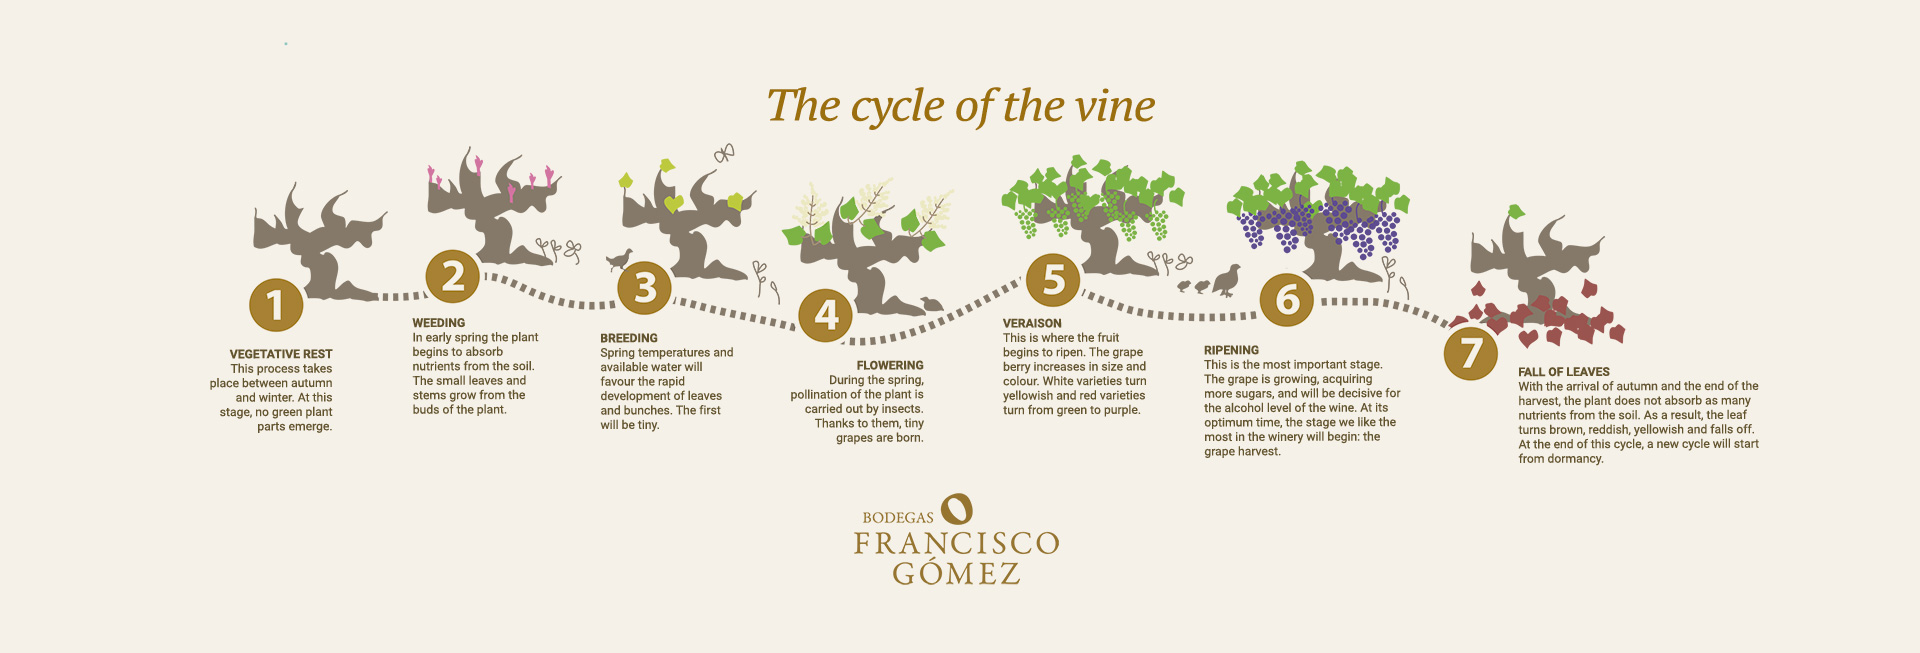 THE CYCLE OF THE VINE